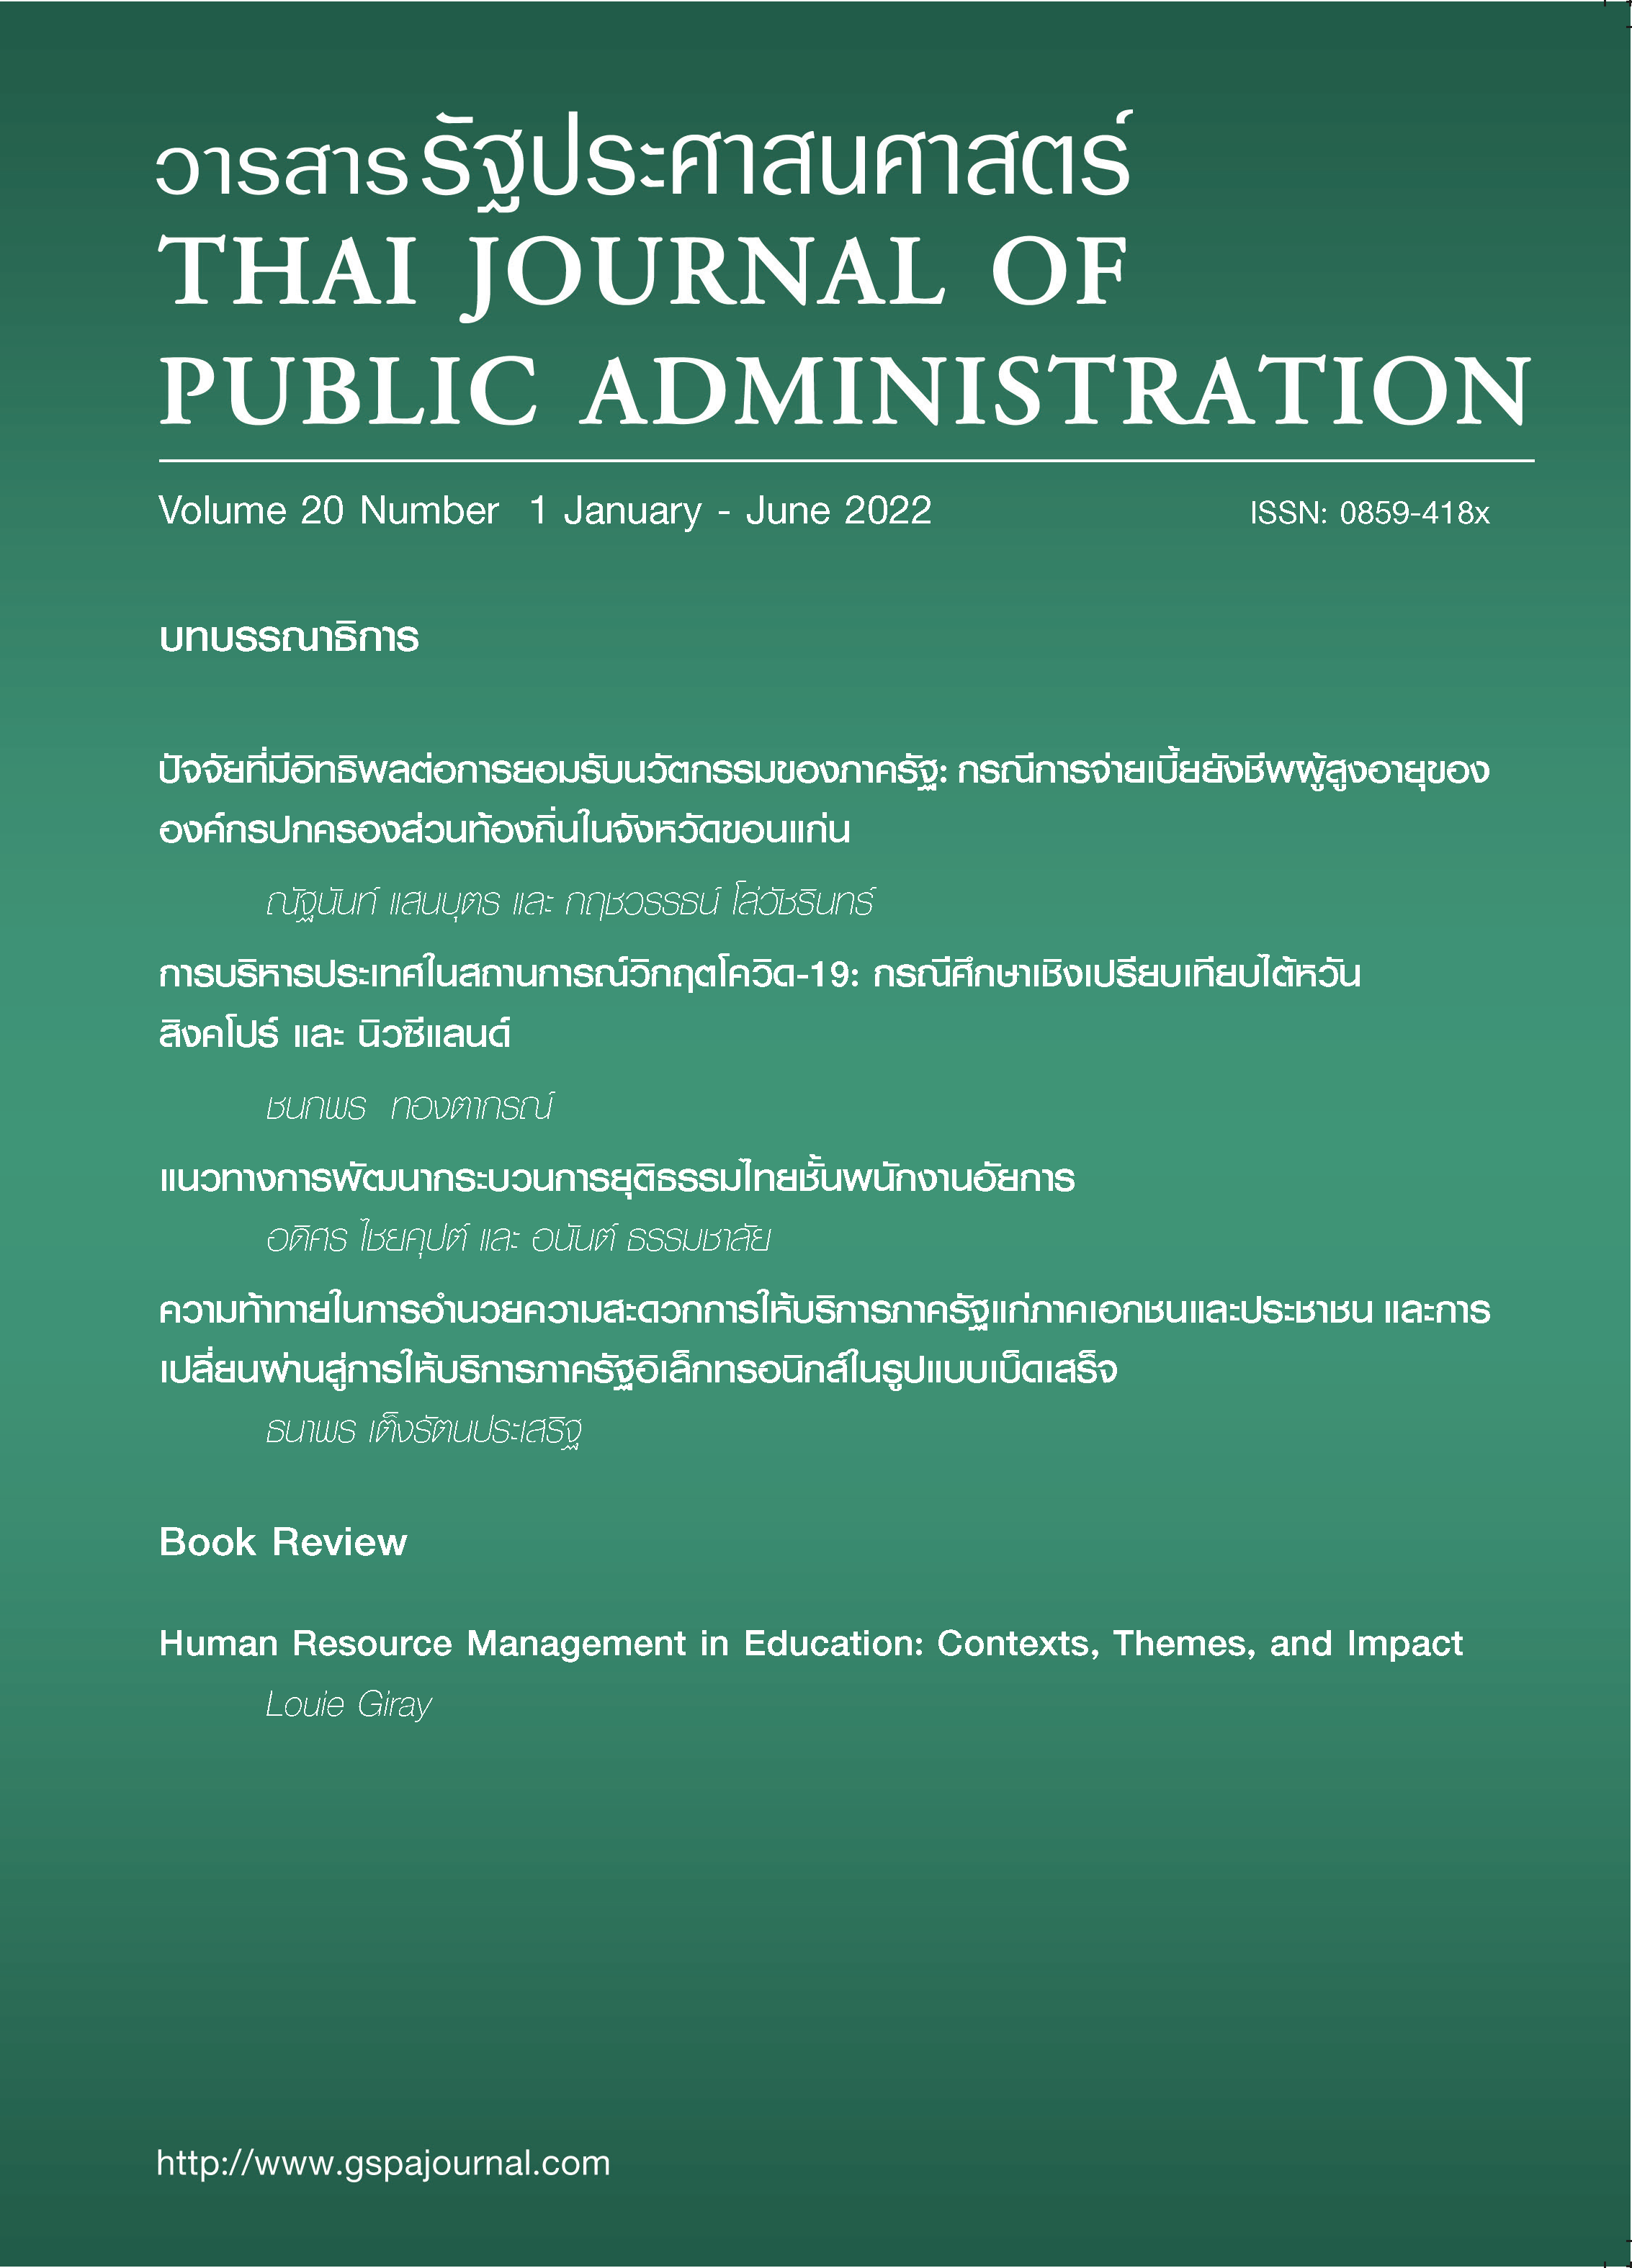 					View Vol. 20 No. 1 (2022): Thai Journal of Public Administration Volume 20 Number 1
				